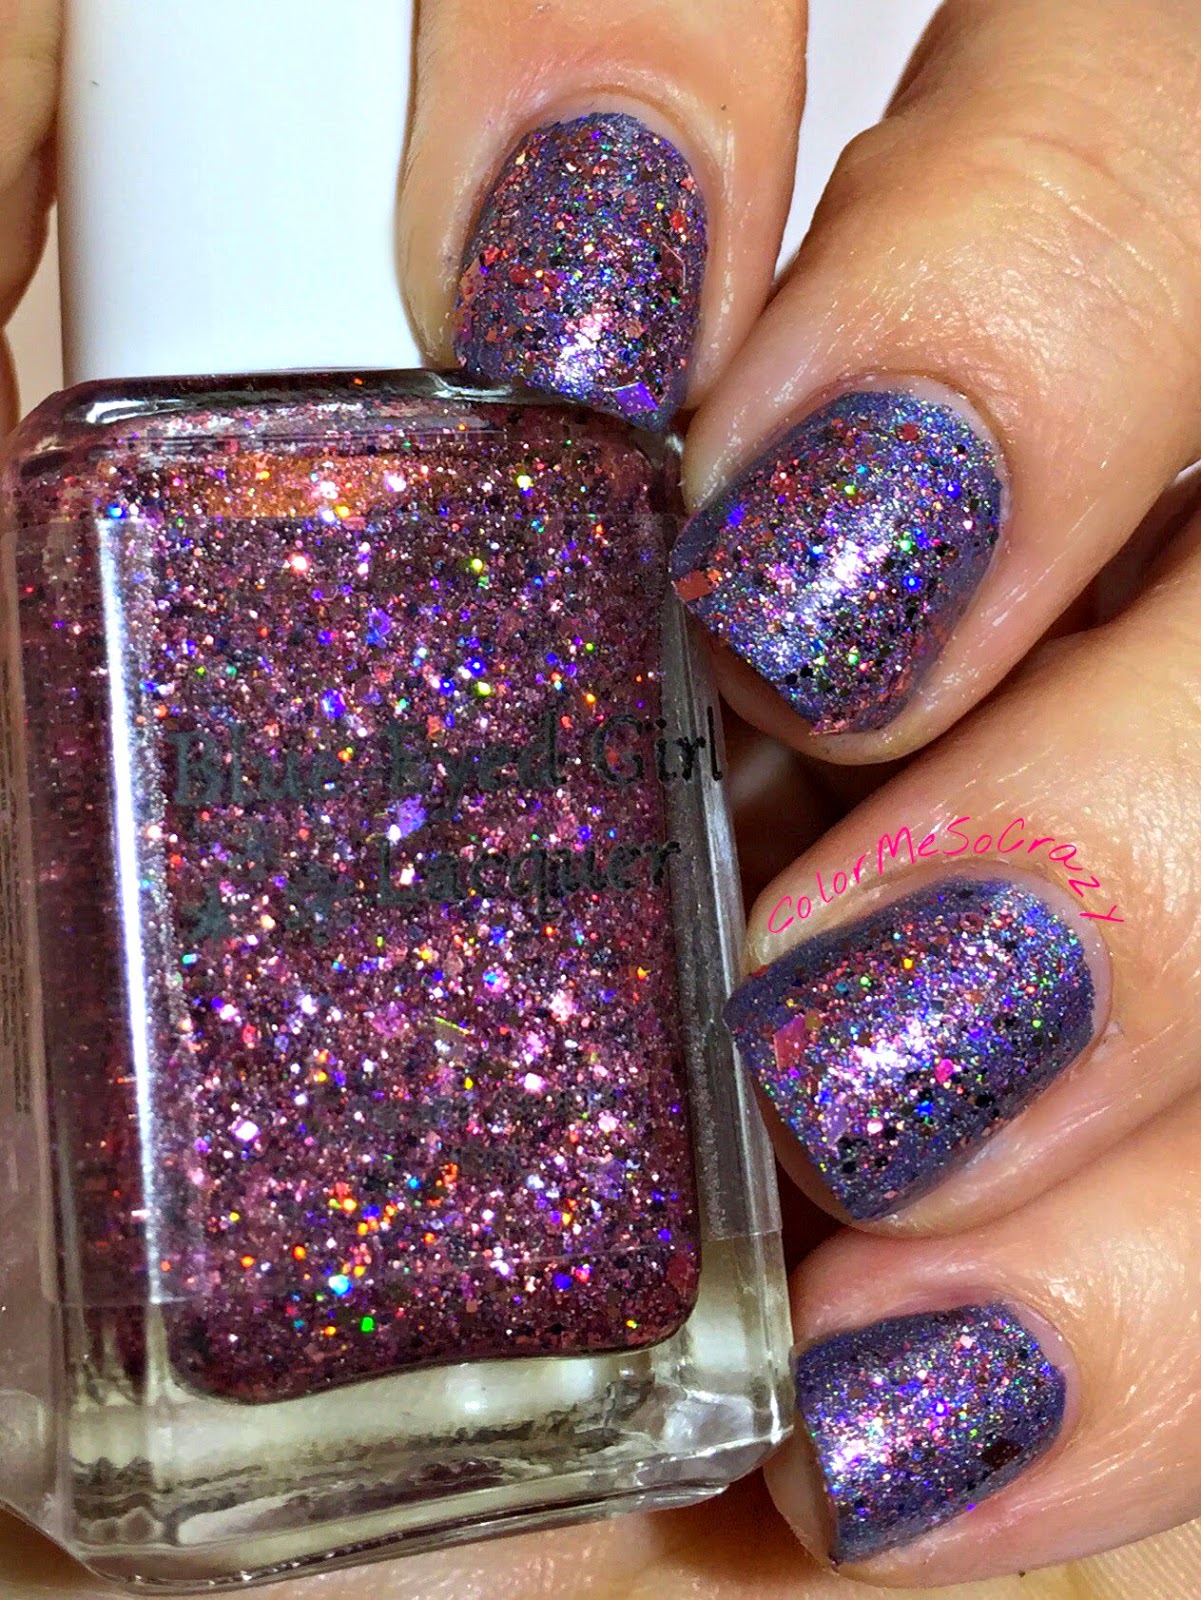 begl, blue eyed girl lacquer, nail polish, pink, spark in the dark, Couting down until I see you, pink glitter indie polish, hypothermia